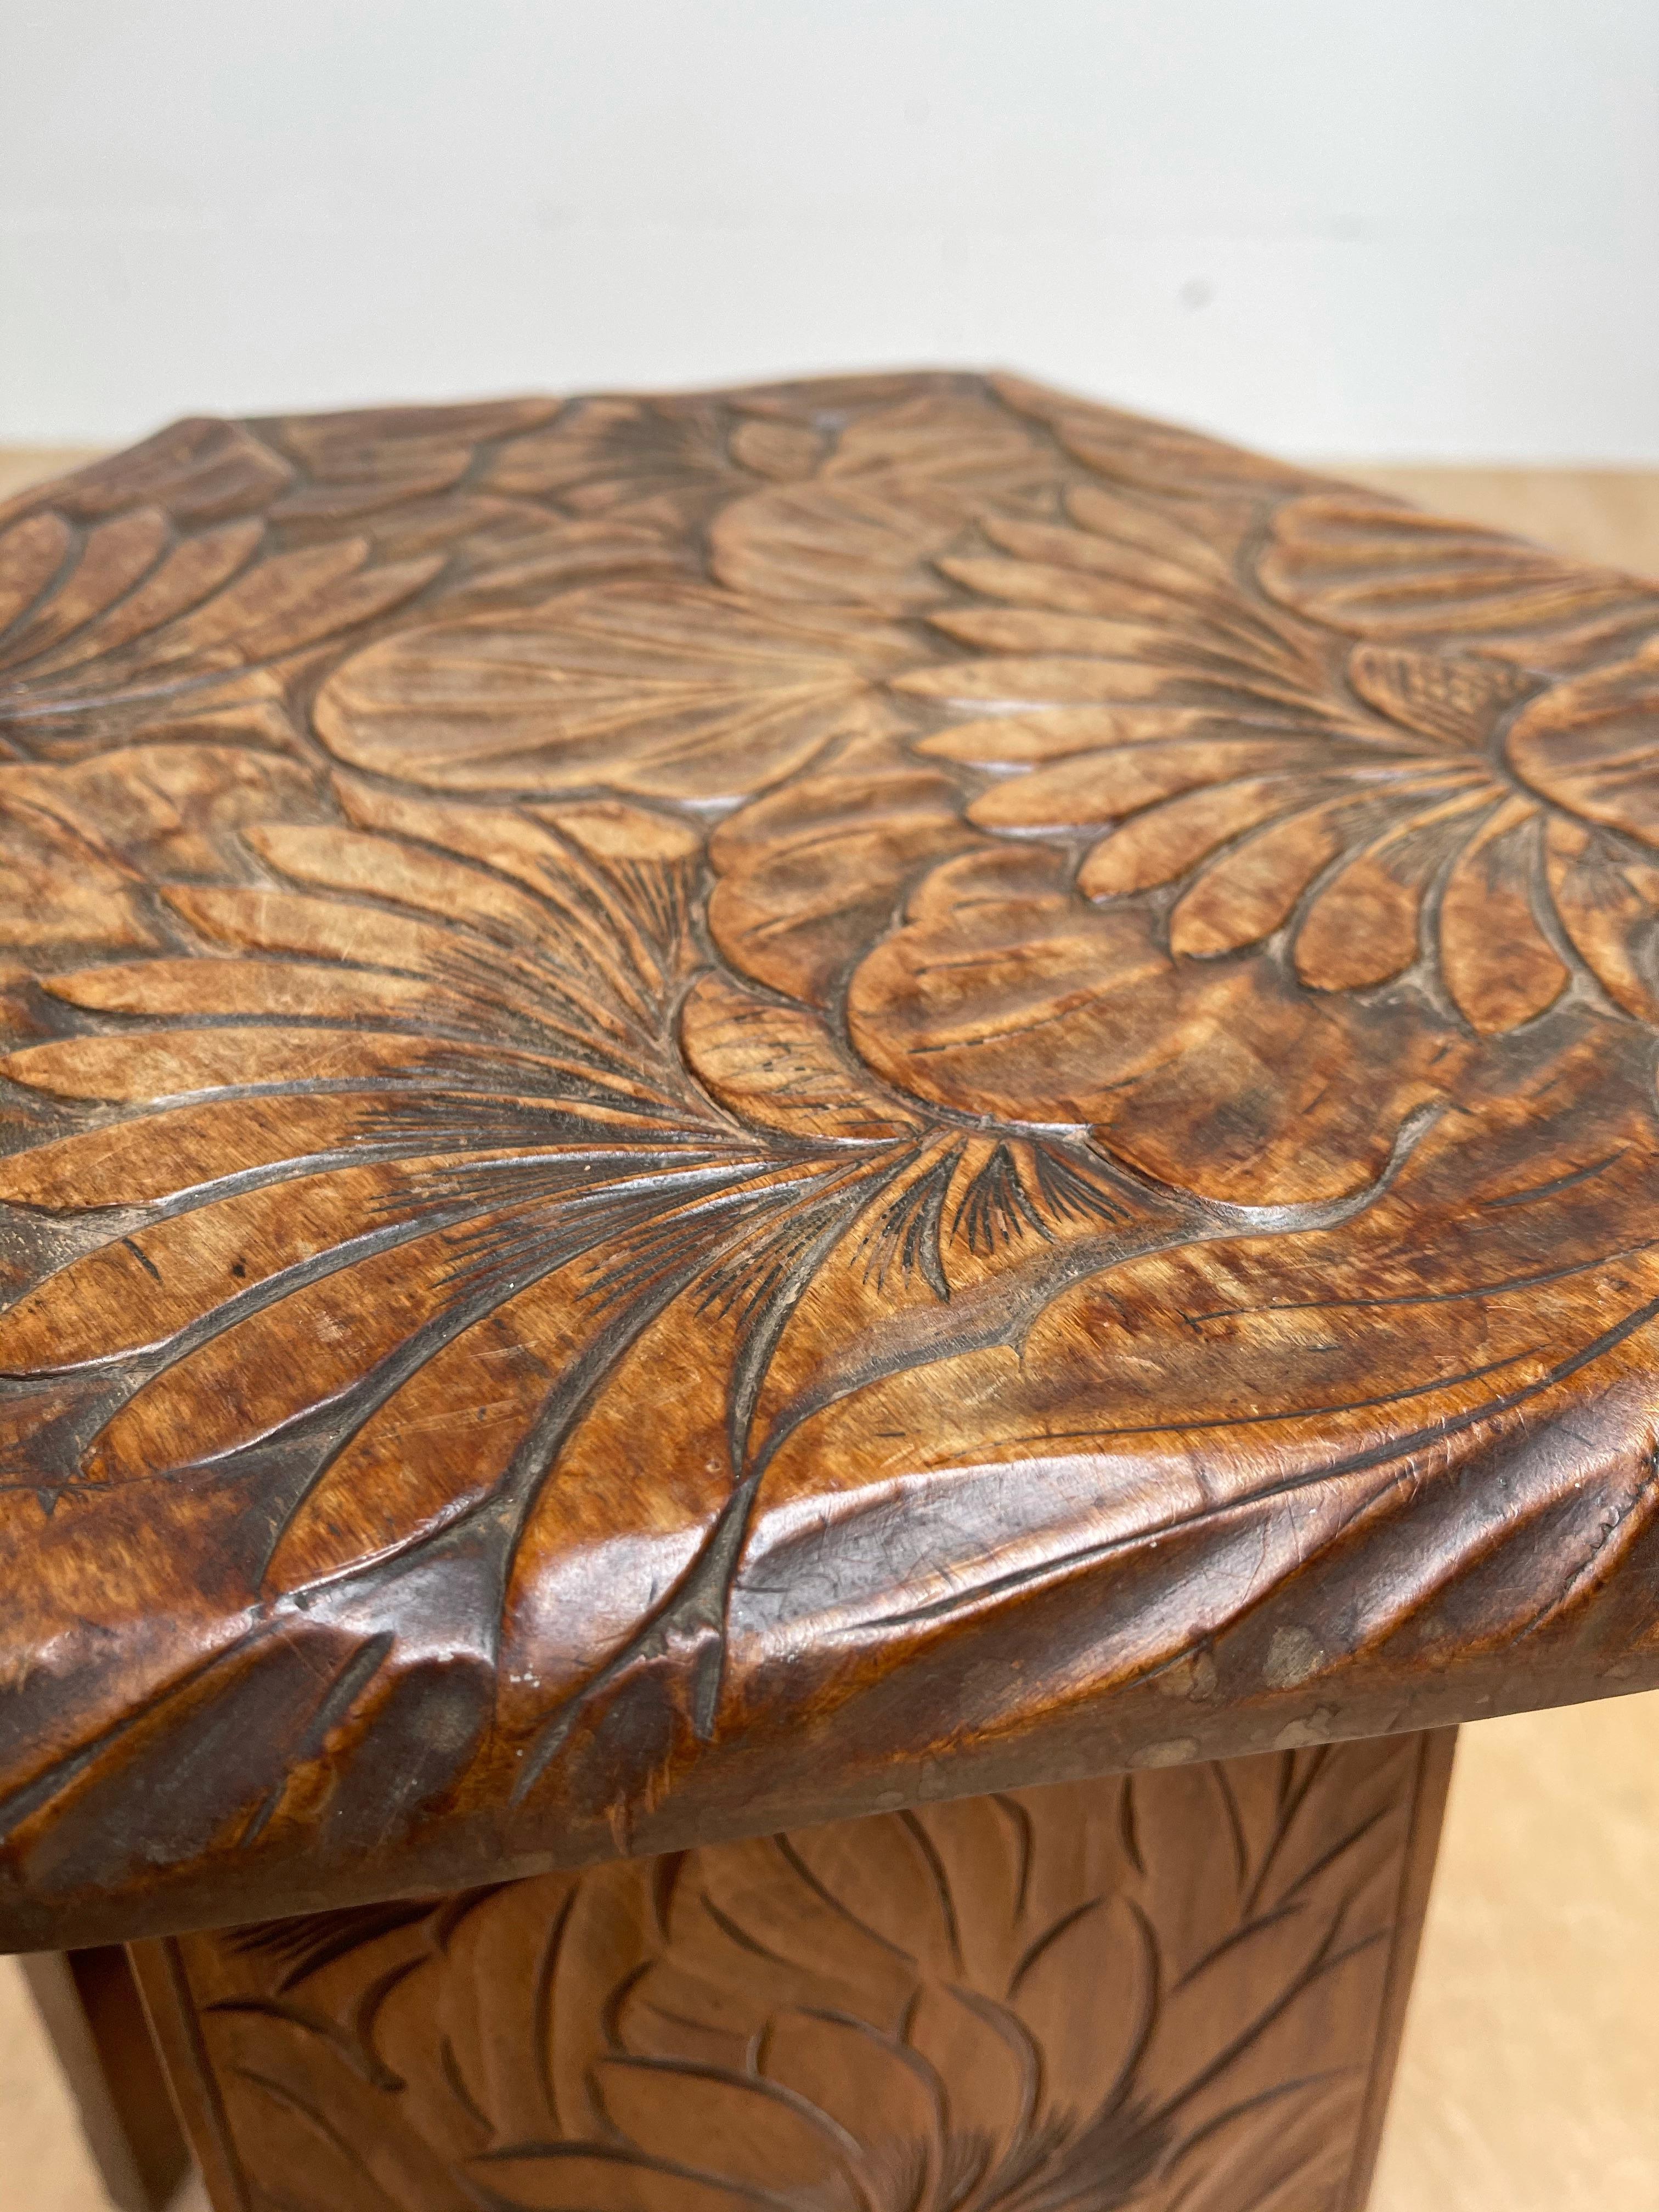 Hand-Crafted Rare and Quality Carved Arts & Crafts Table / Plant Stand with Flower Sculptures